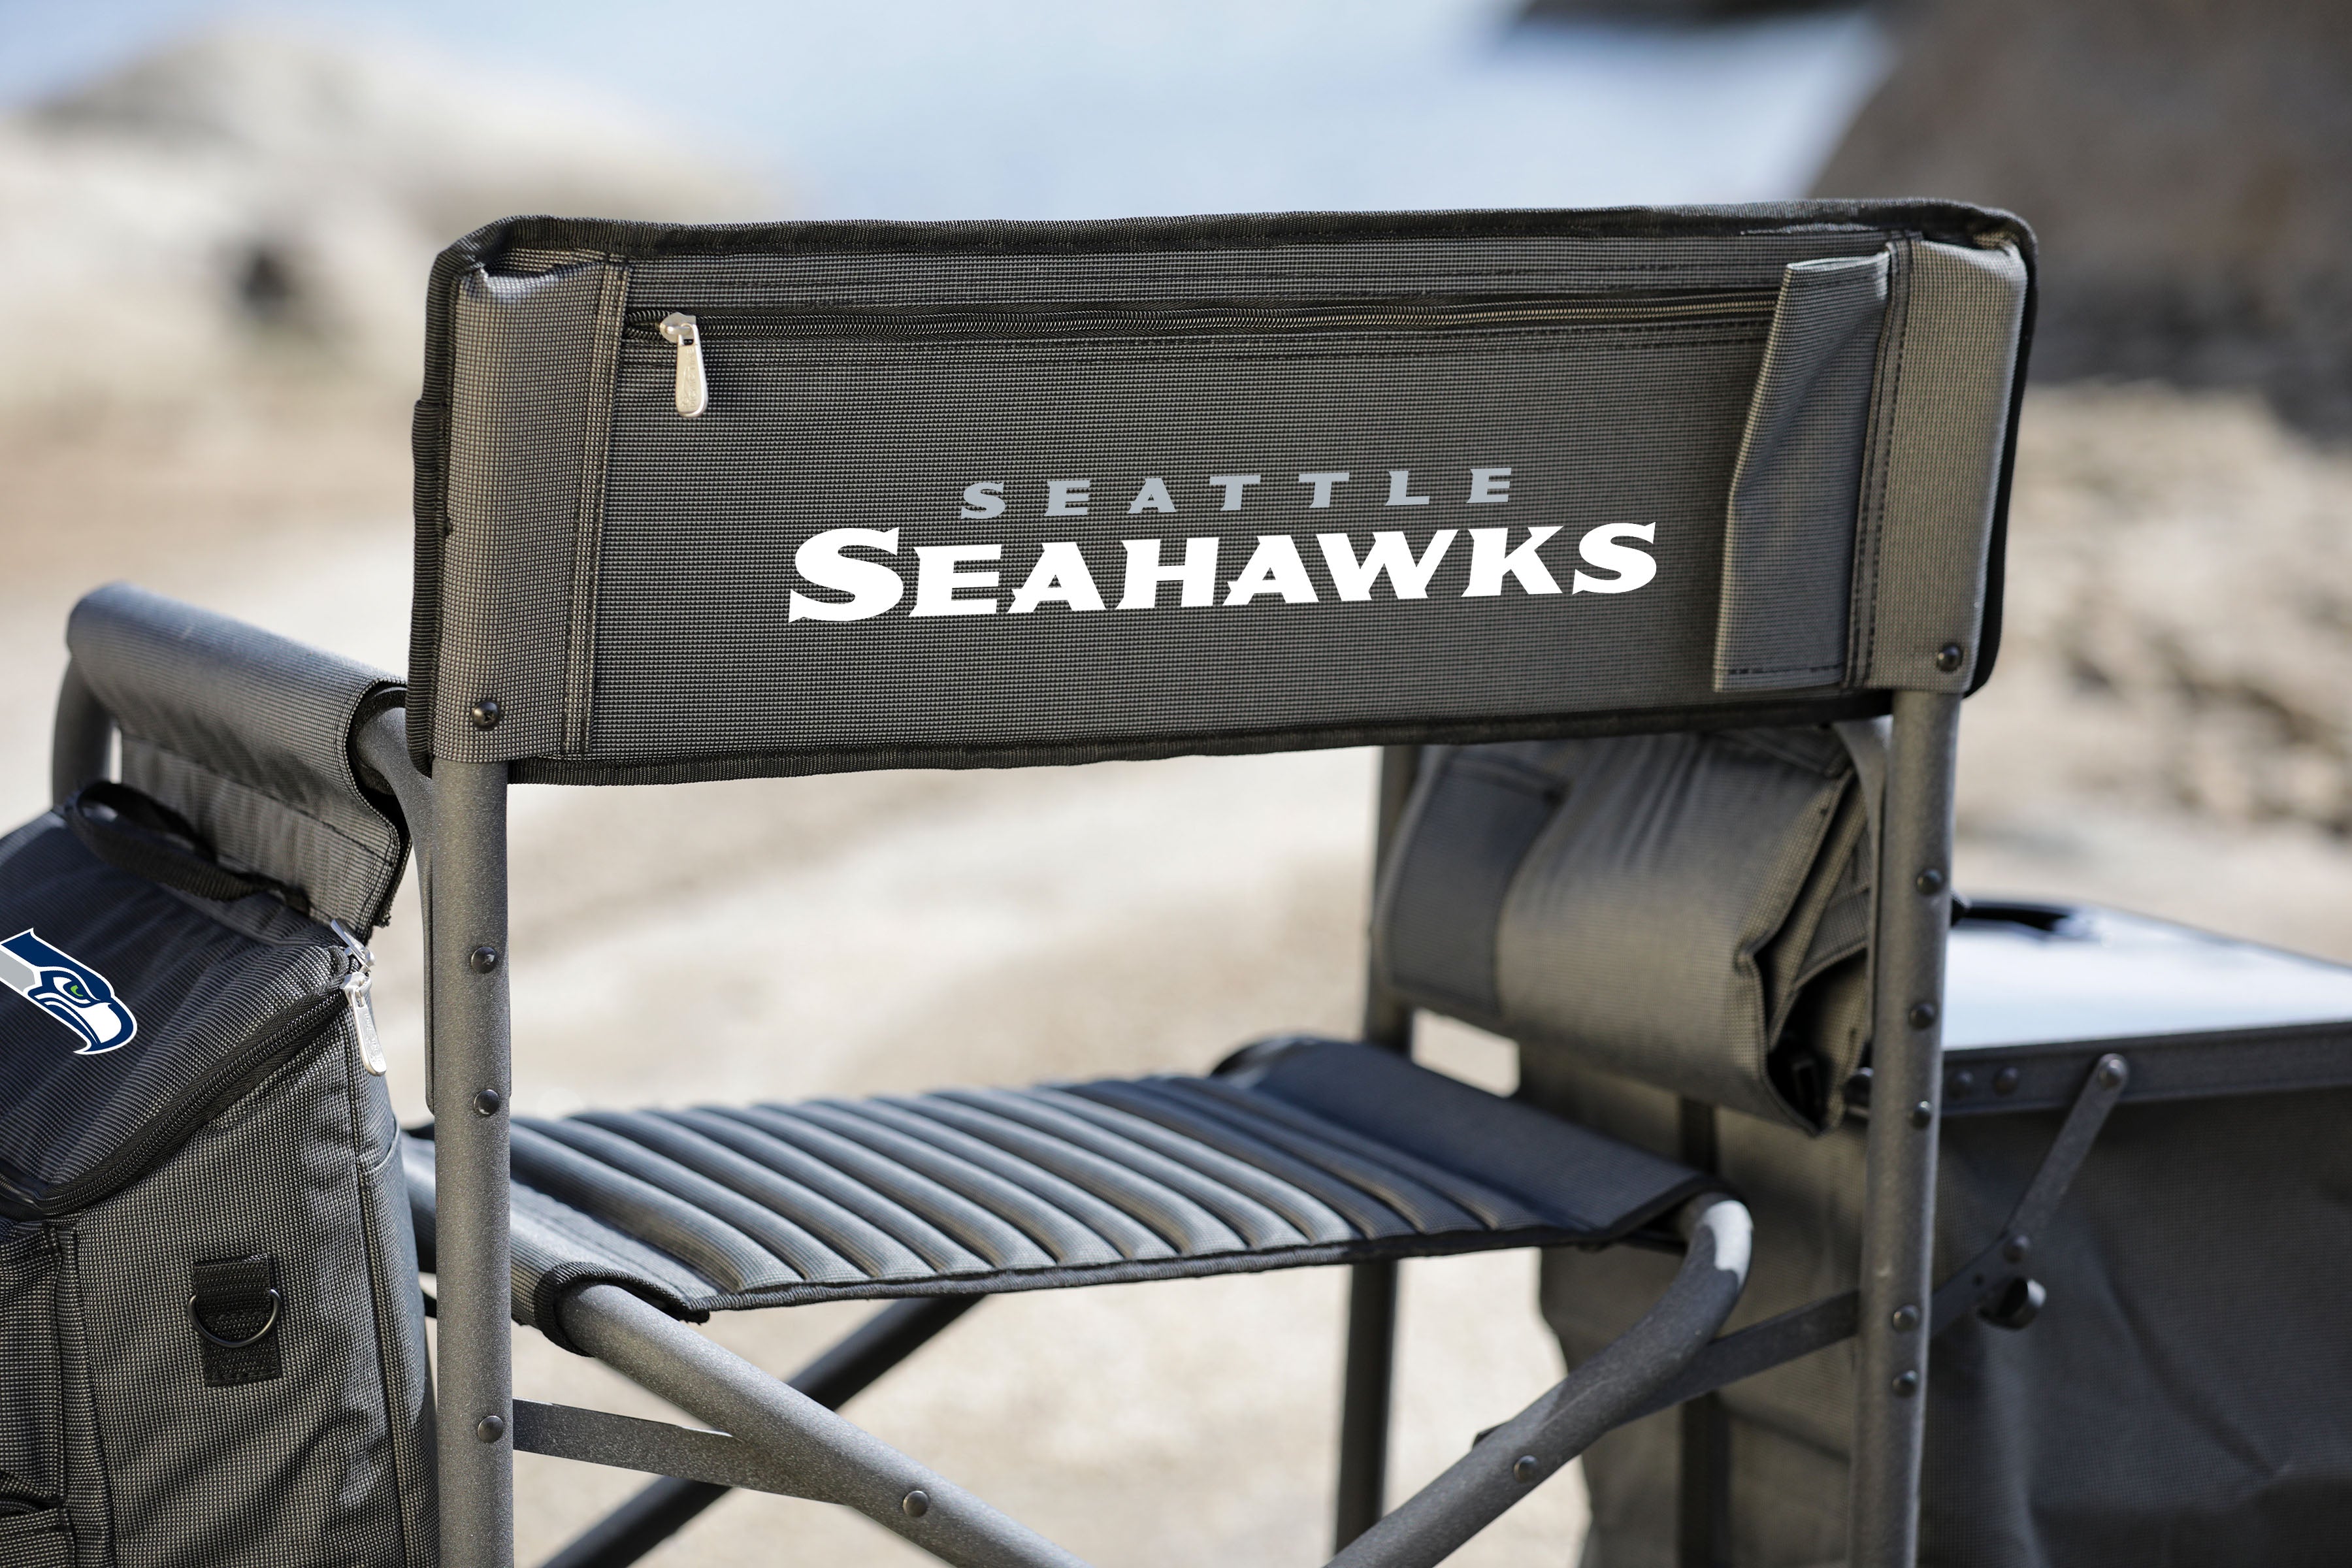 Seattle Seahawks - Fusion Camping Chair